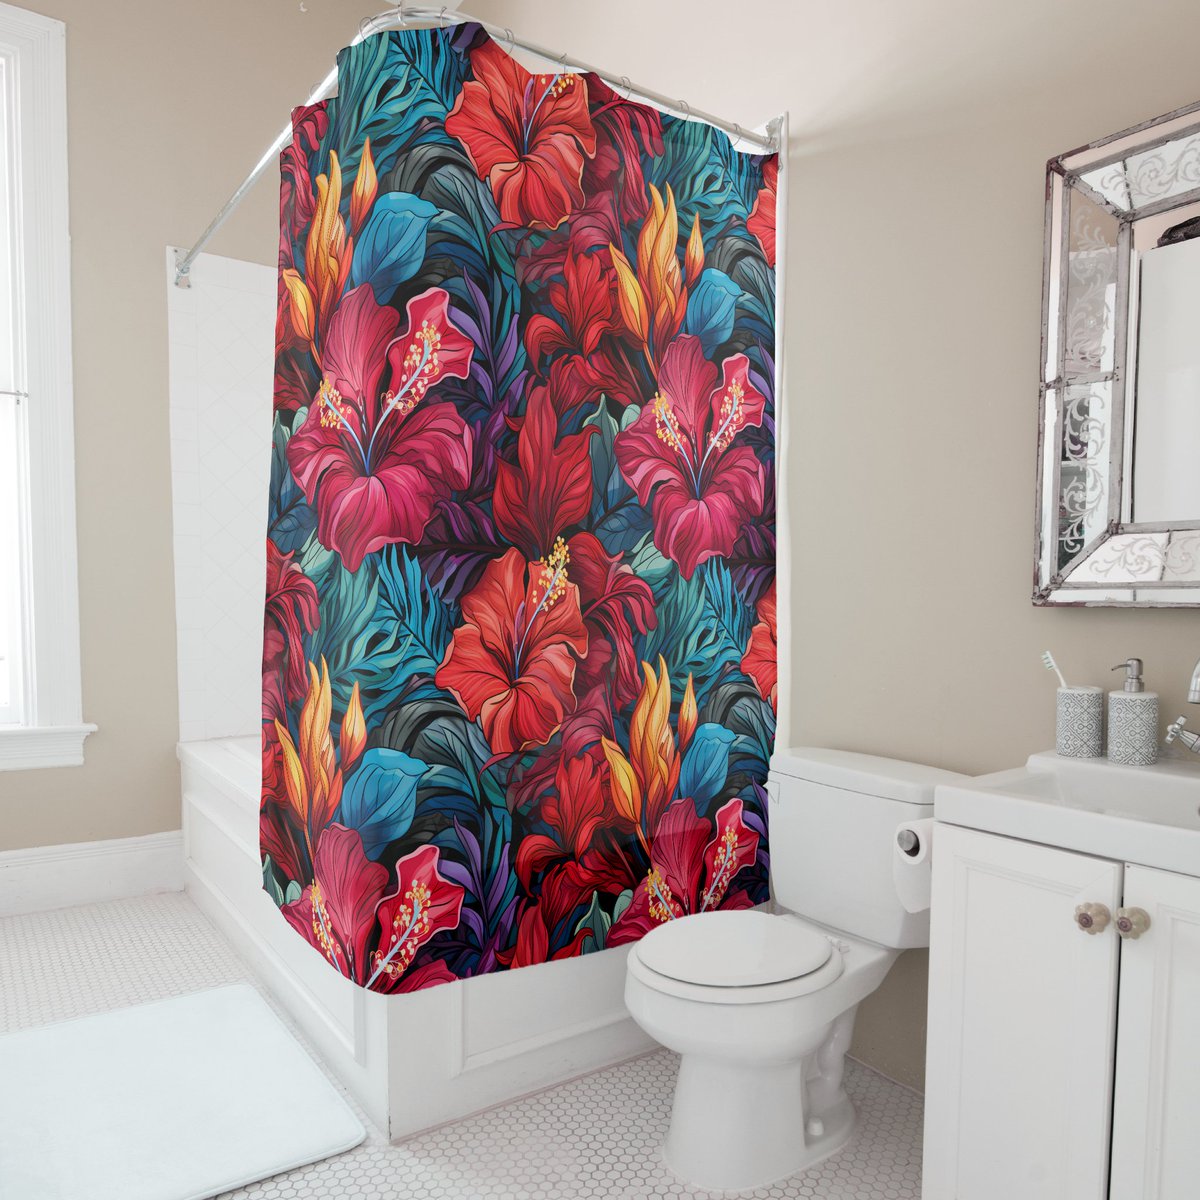 Transform your bathroom into a blooming garden with our floral-patterned shower curtain.
-
-
-
#floral #floraldesign #florals #floralillustration #flower #flowers #zazzle #teepublic #society6 #printify #showercurtain #curtain #curtains #bathroom #bathroomdesign #redflower #plants